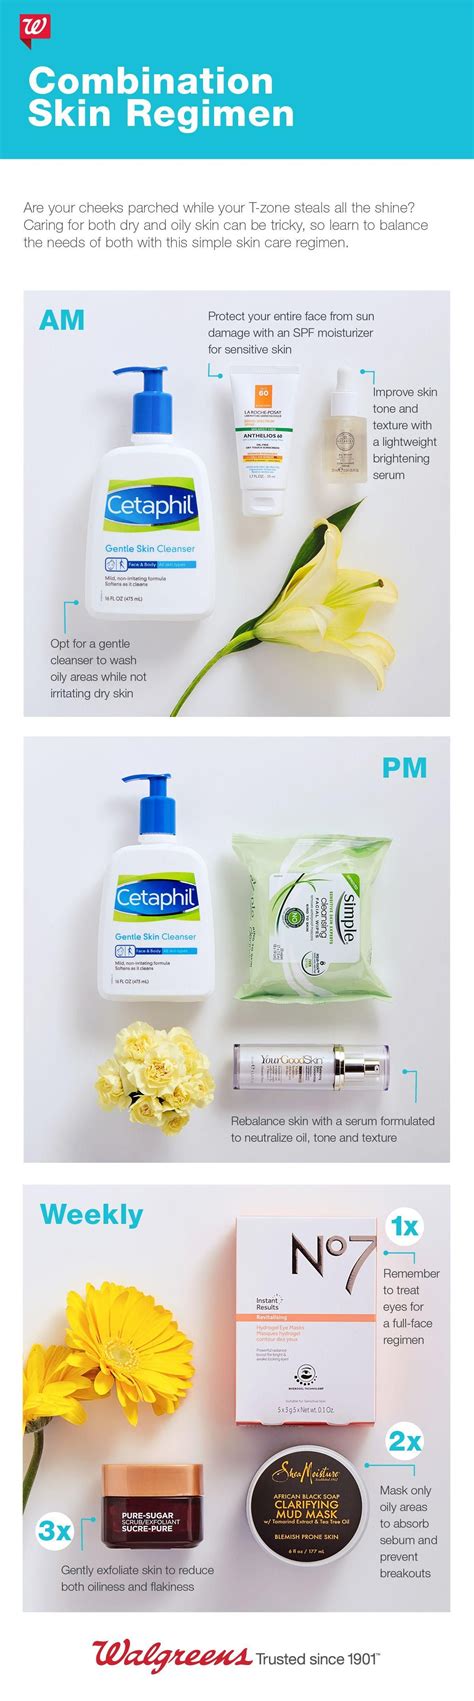 Skincare Routine Products For Combination Skin Beauty And Health